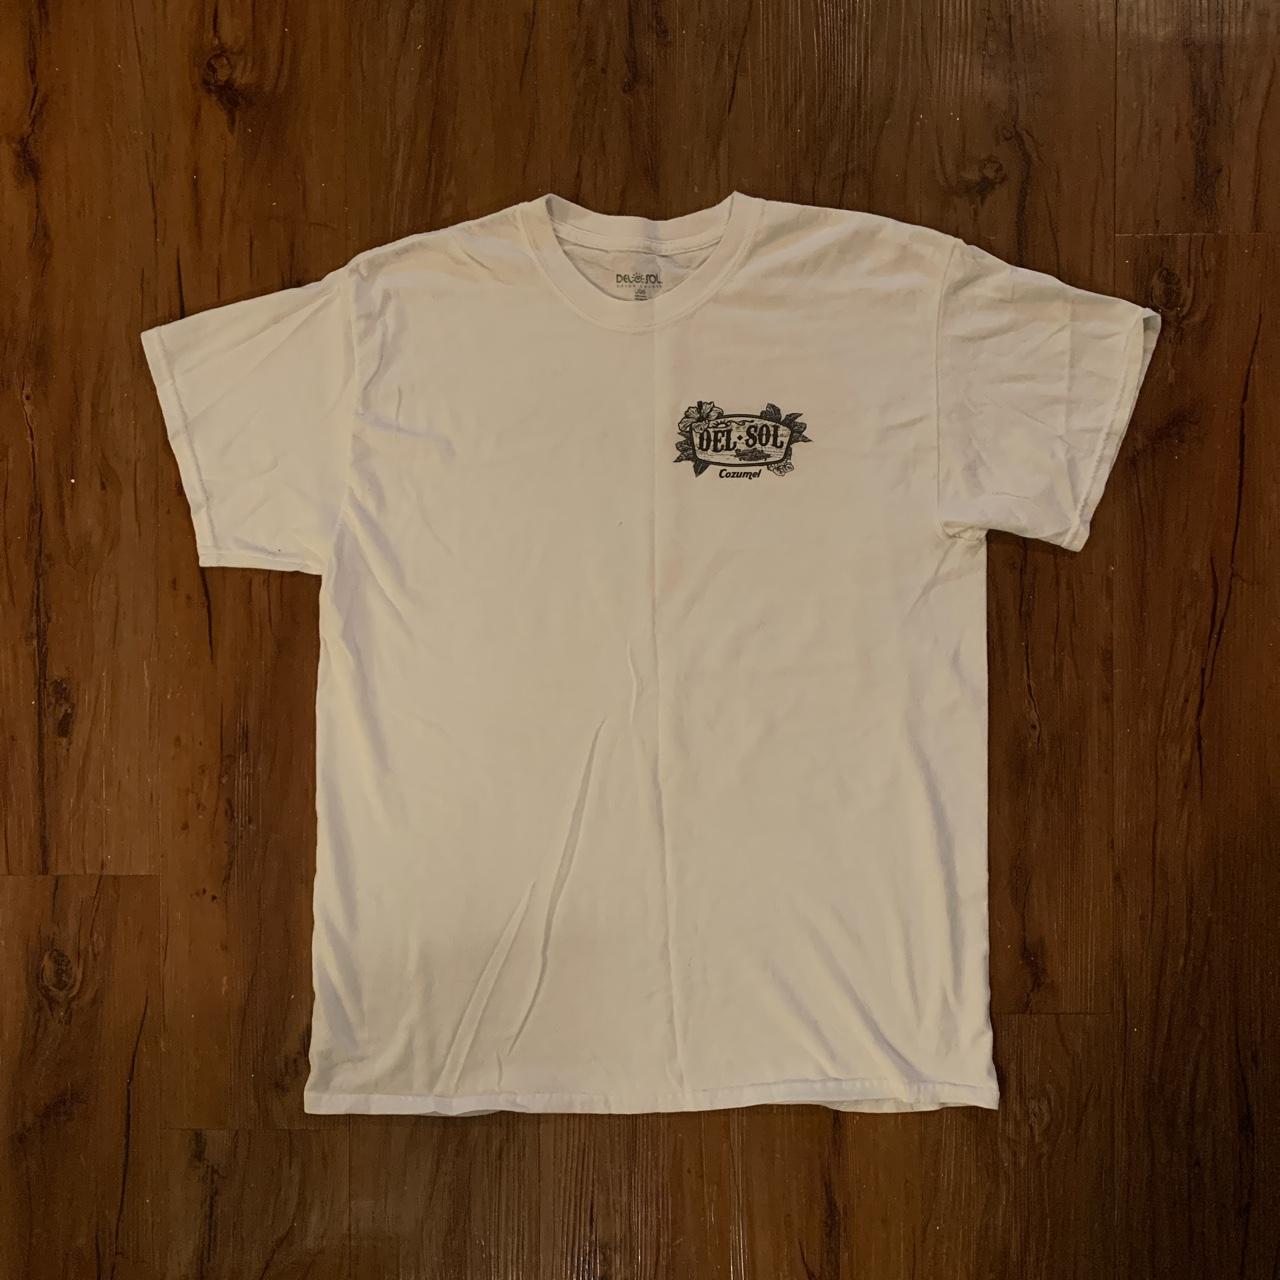 white vintage del sol bird t shirt from the 2000s no... - Depop